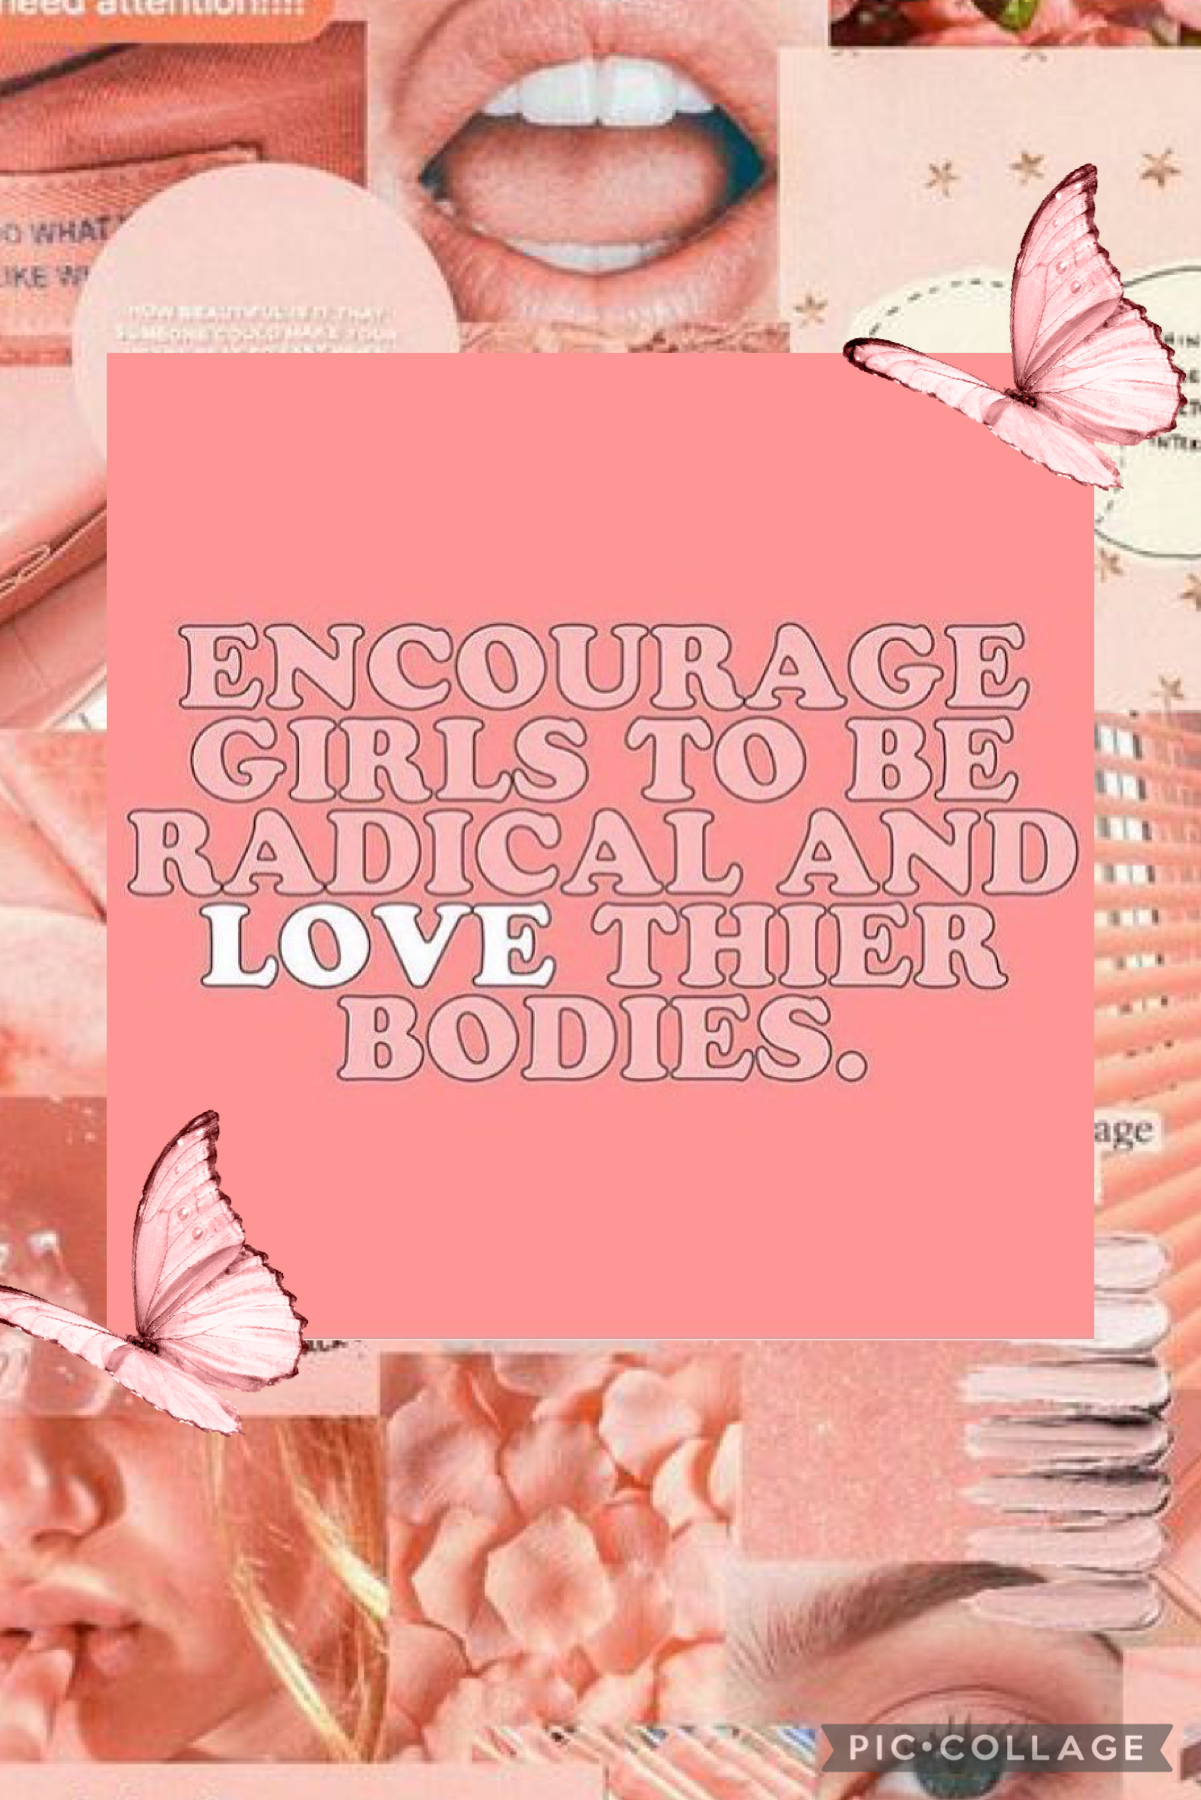 🌸tap!🌸 
i love this quote so much! every body is beautiful! love yourself because you are so beautiful! 💕